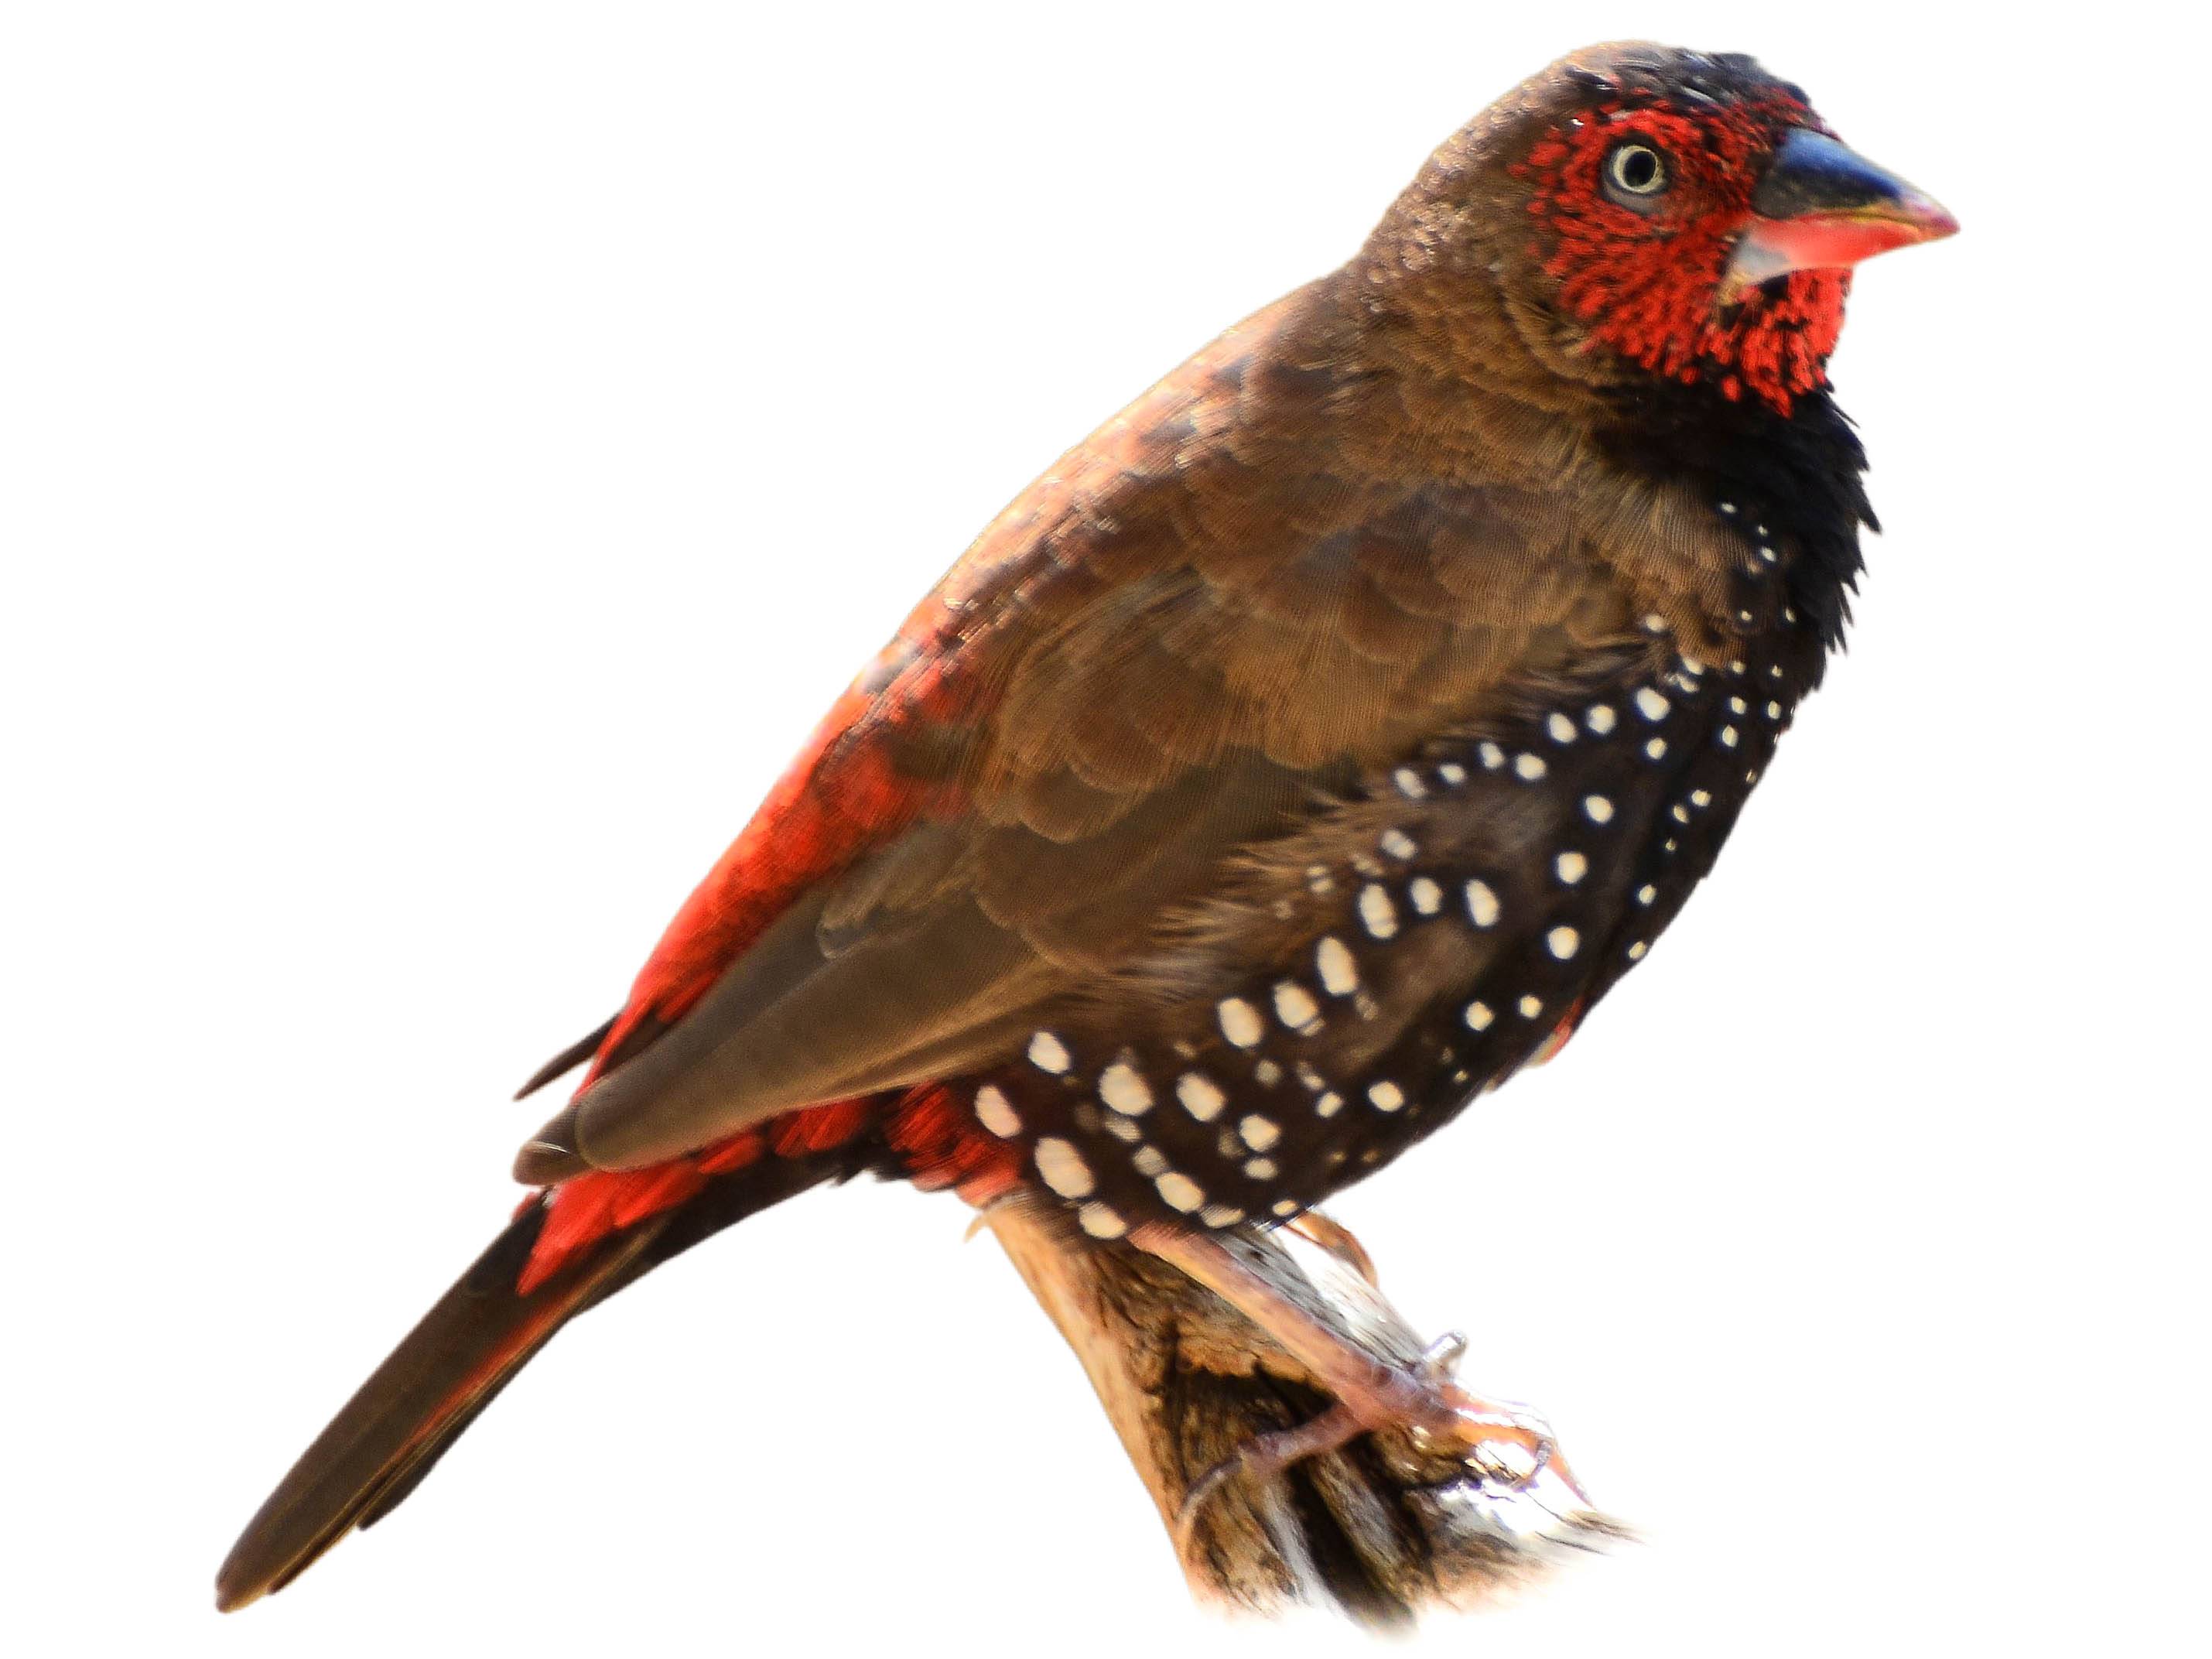 A photo of a Painted Finch (Emblema pictum)